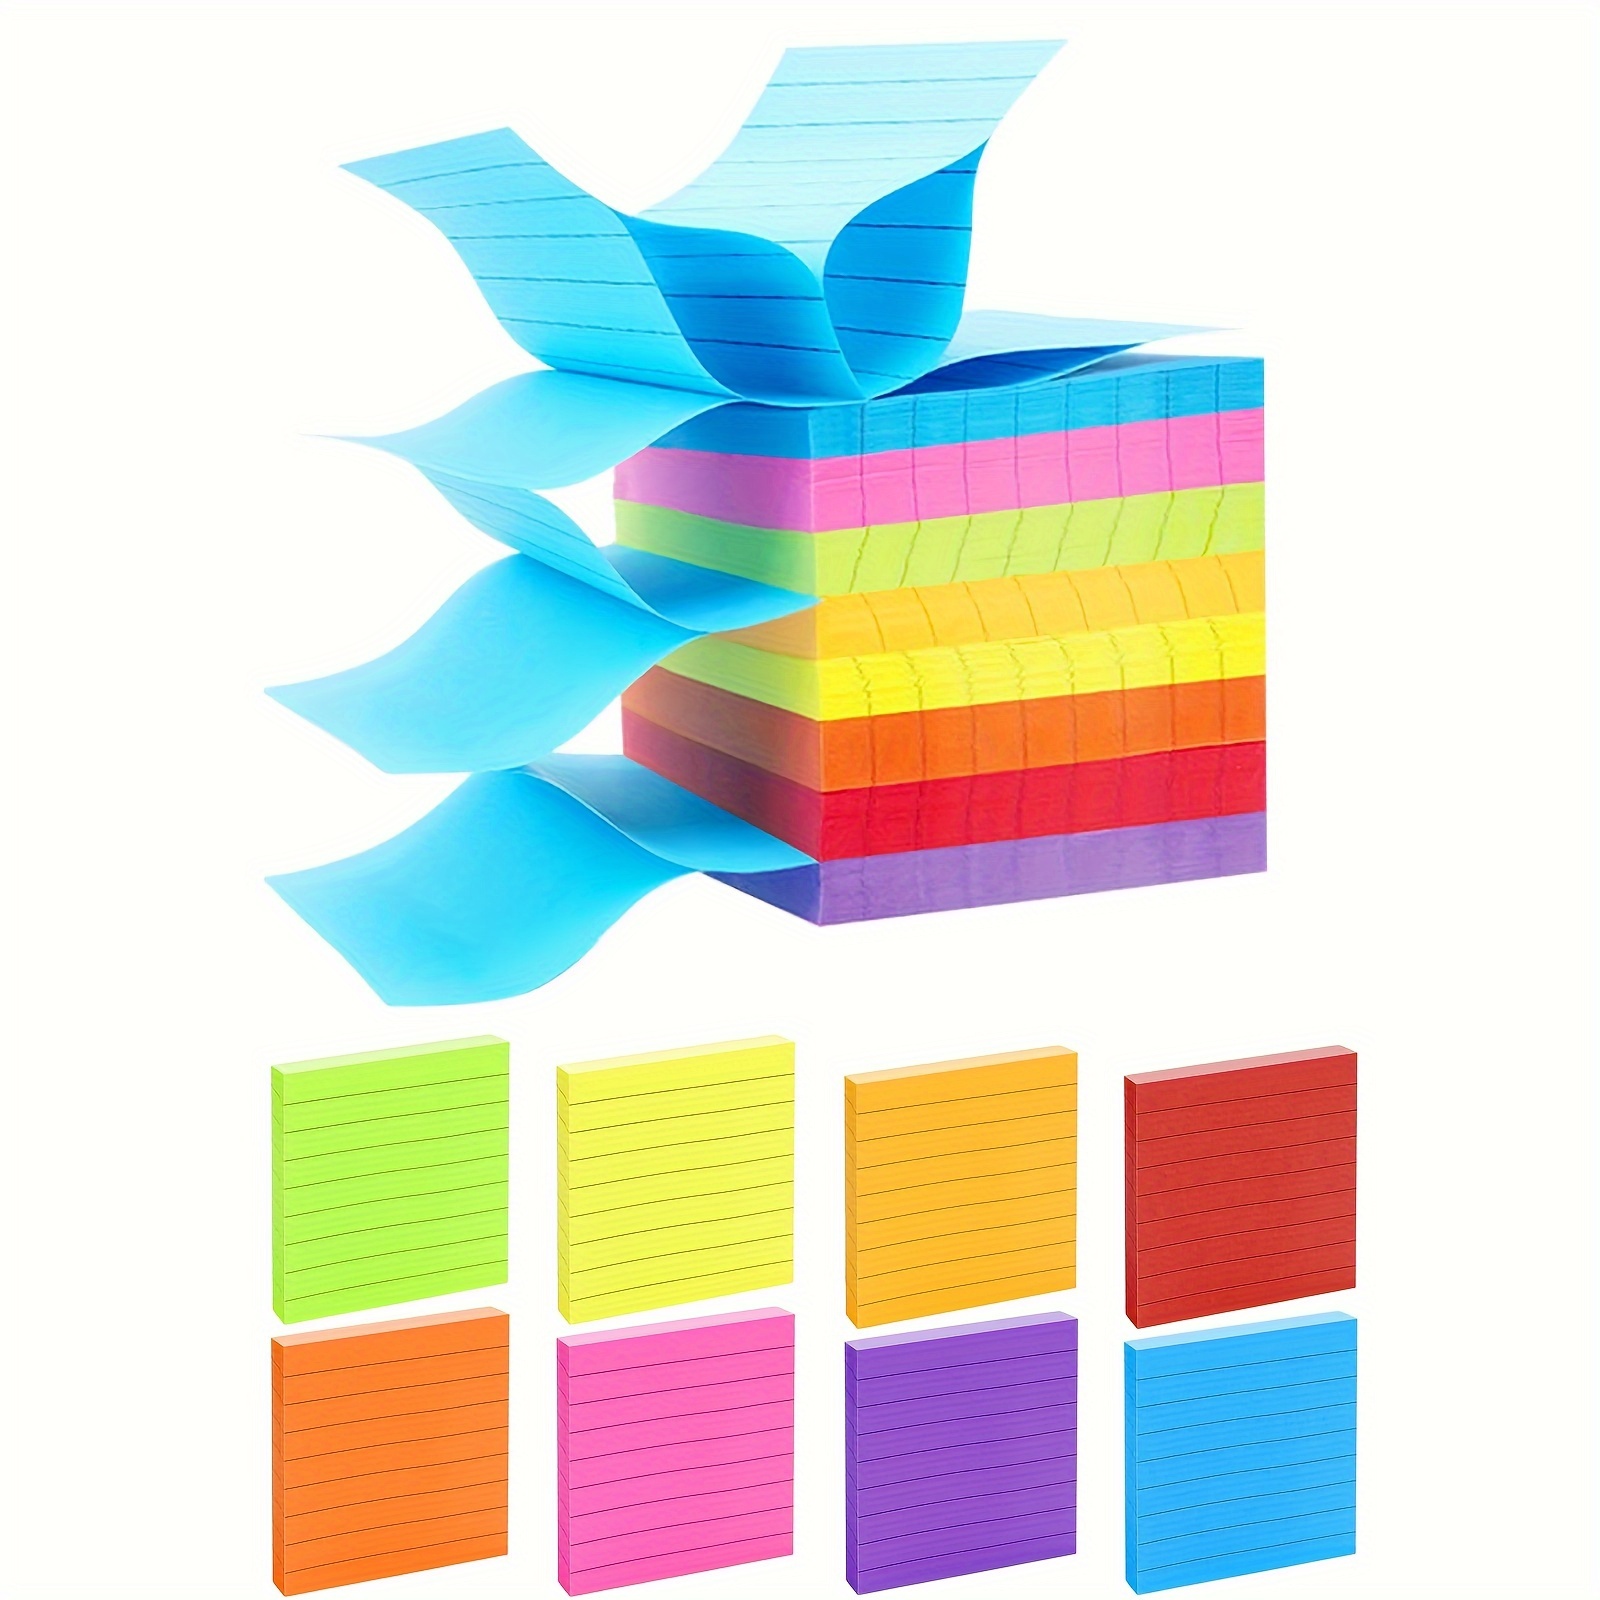 

8 Packs Pop Up Lined Sticky Notes 3x3in, Self Stick Notes With Lines 50 Sheets Per Pad Bright Self Adhesive Memo Papers With Lines For Office, Home, Meeting